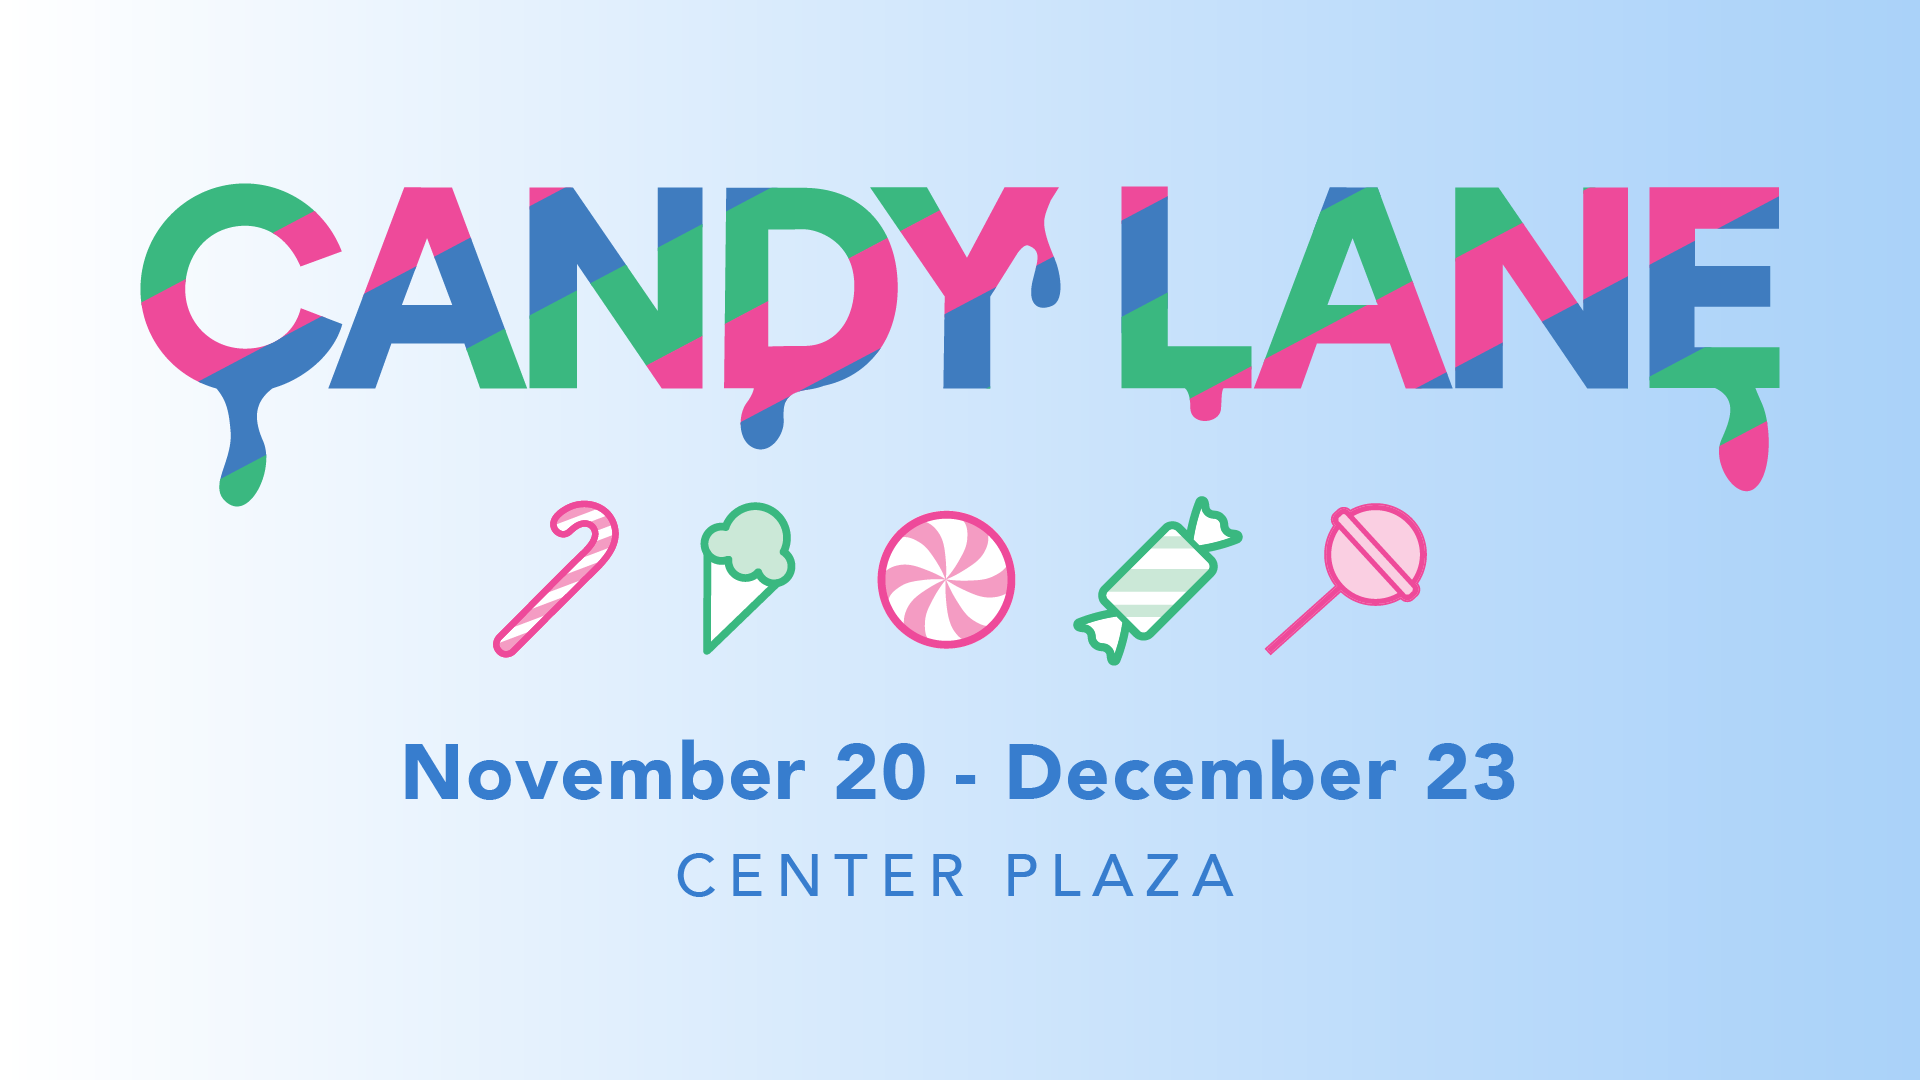 Candy Lane Event banner with logo and candy illustrations.